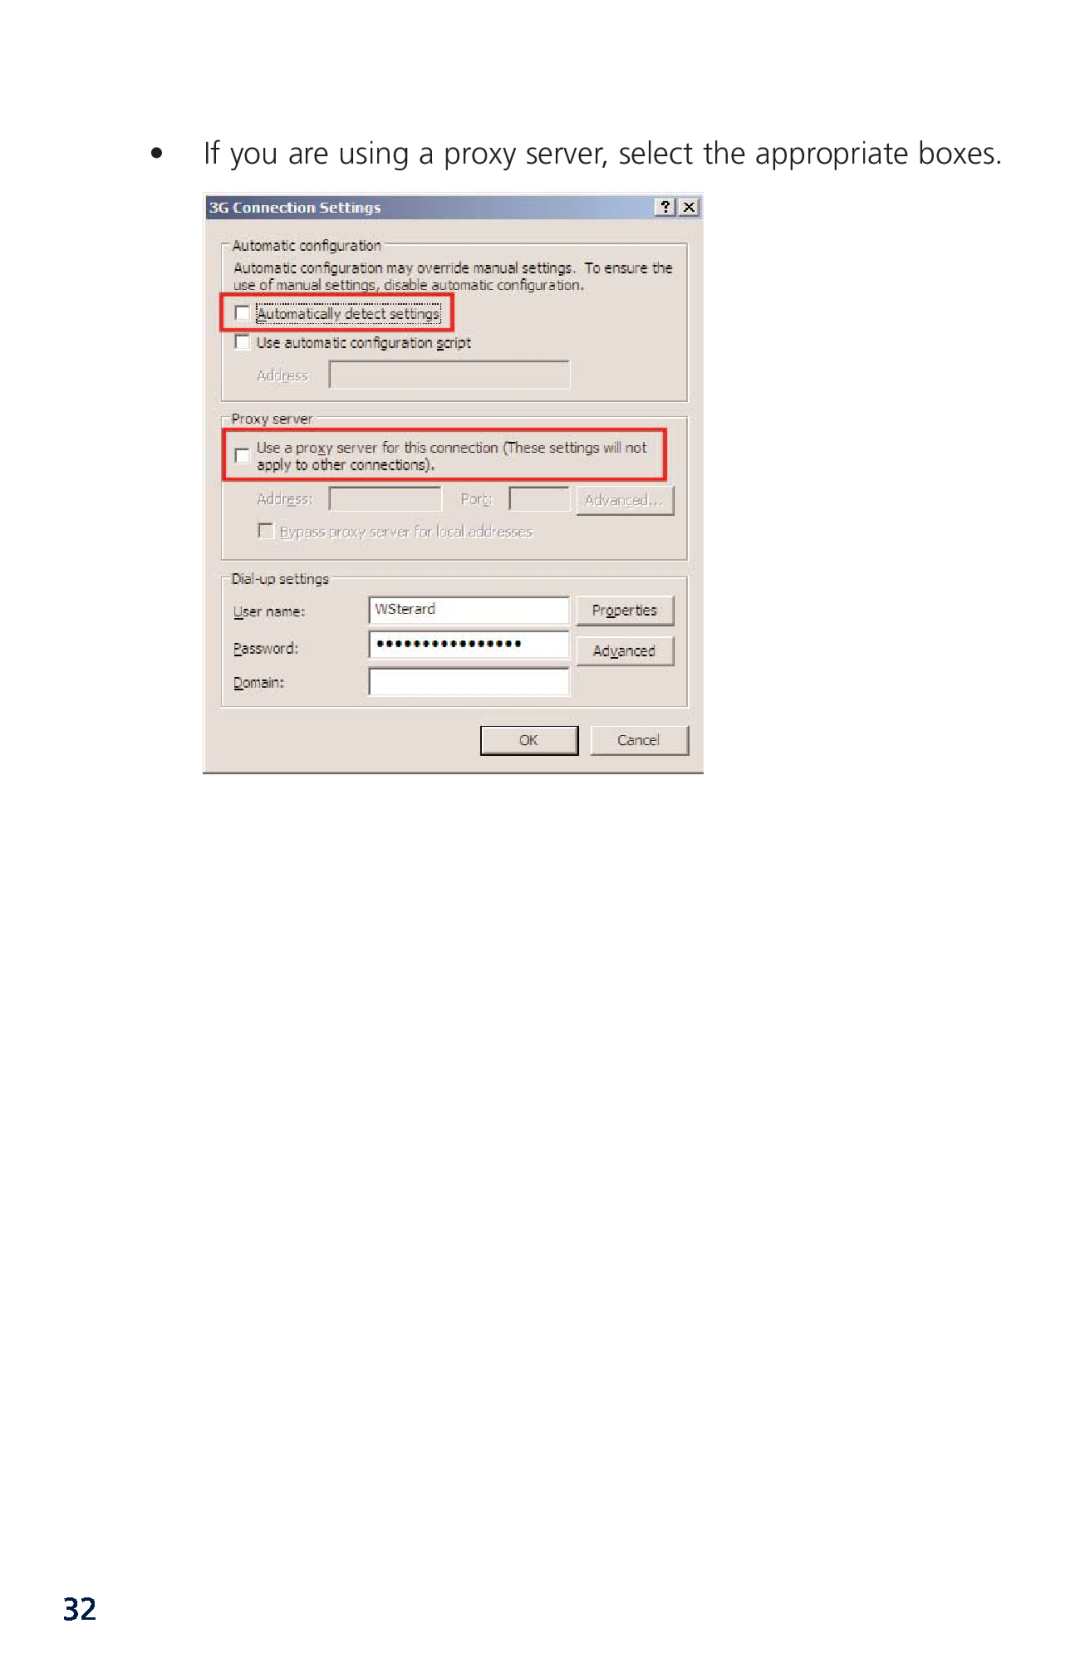 Novatel XU870 manual If you are using a proxy server, select the appropriate boxes 